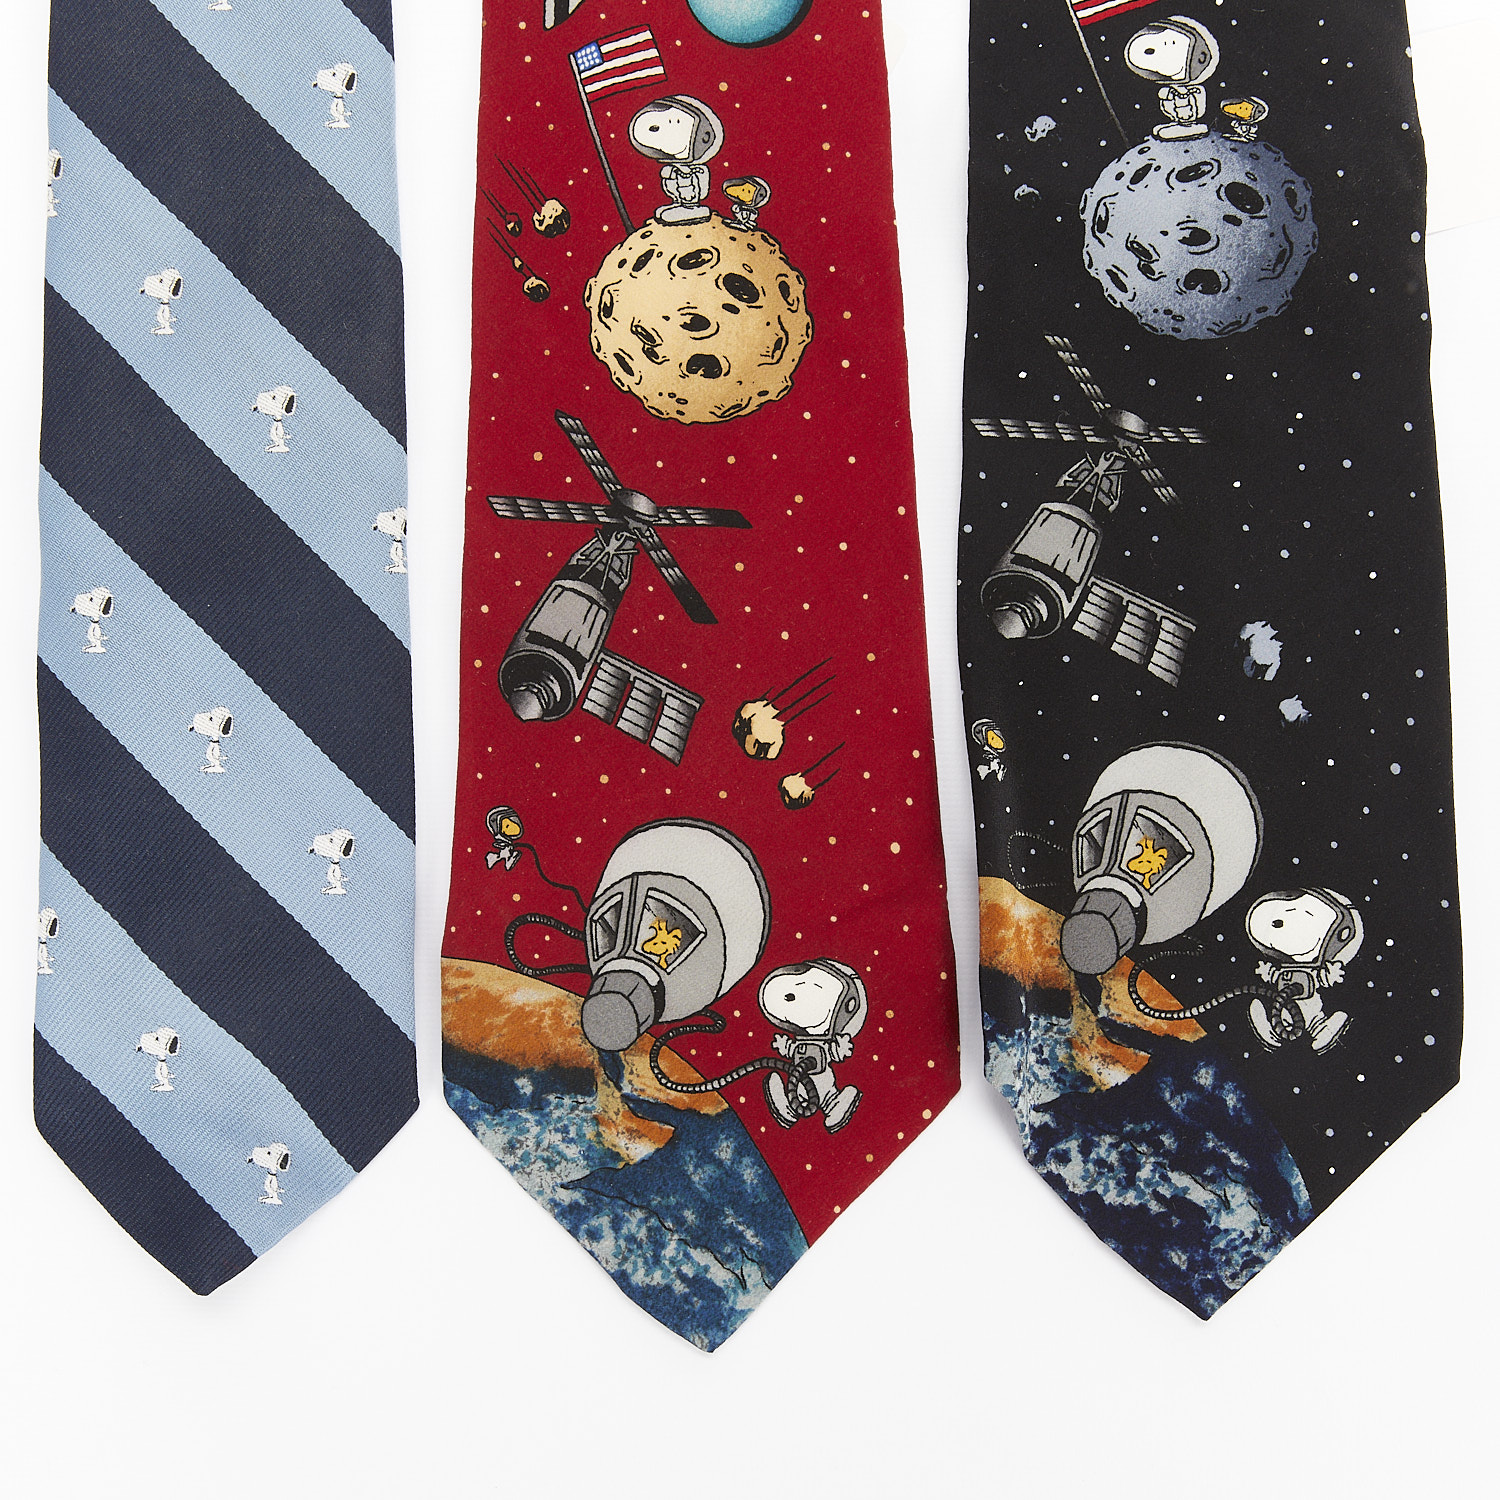 3 Ties of Snoopy - Striped & Space Themed - Image 2 of 10